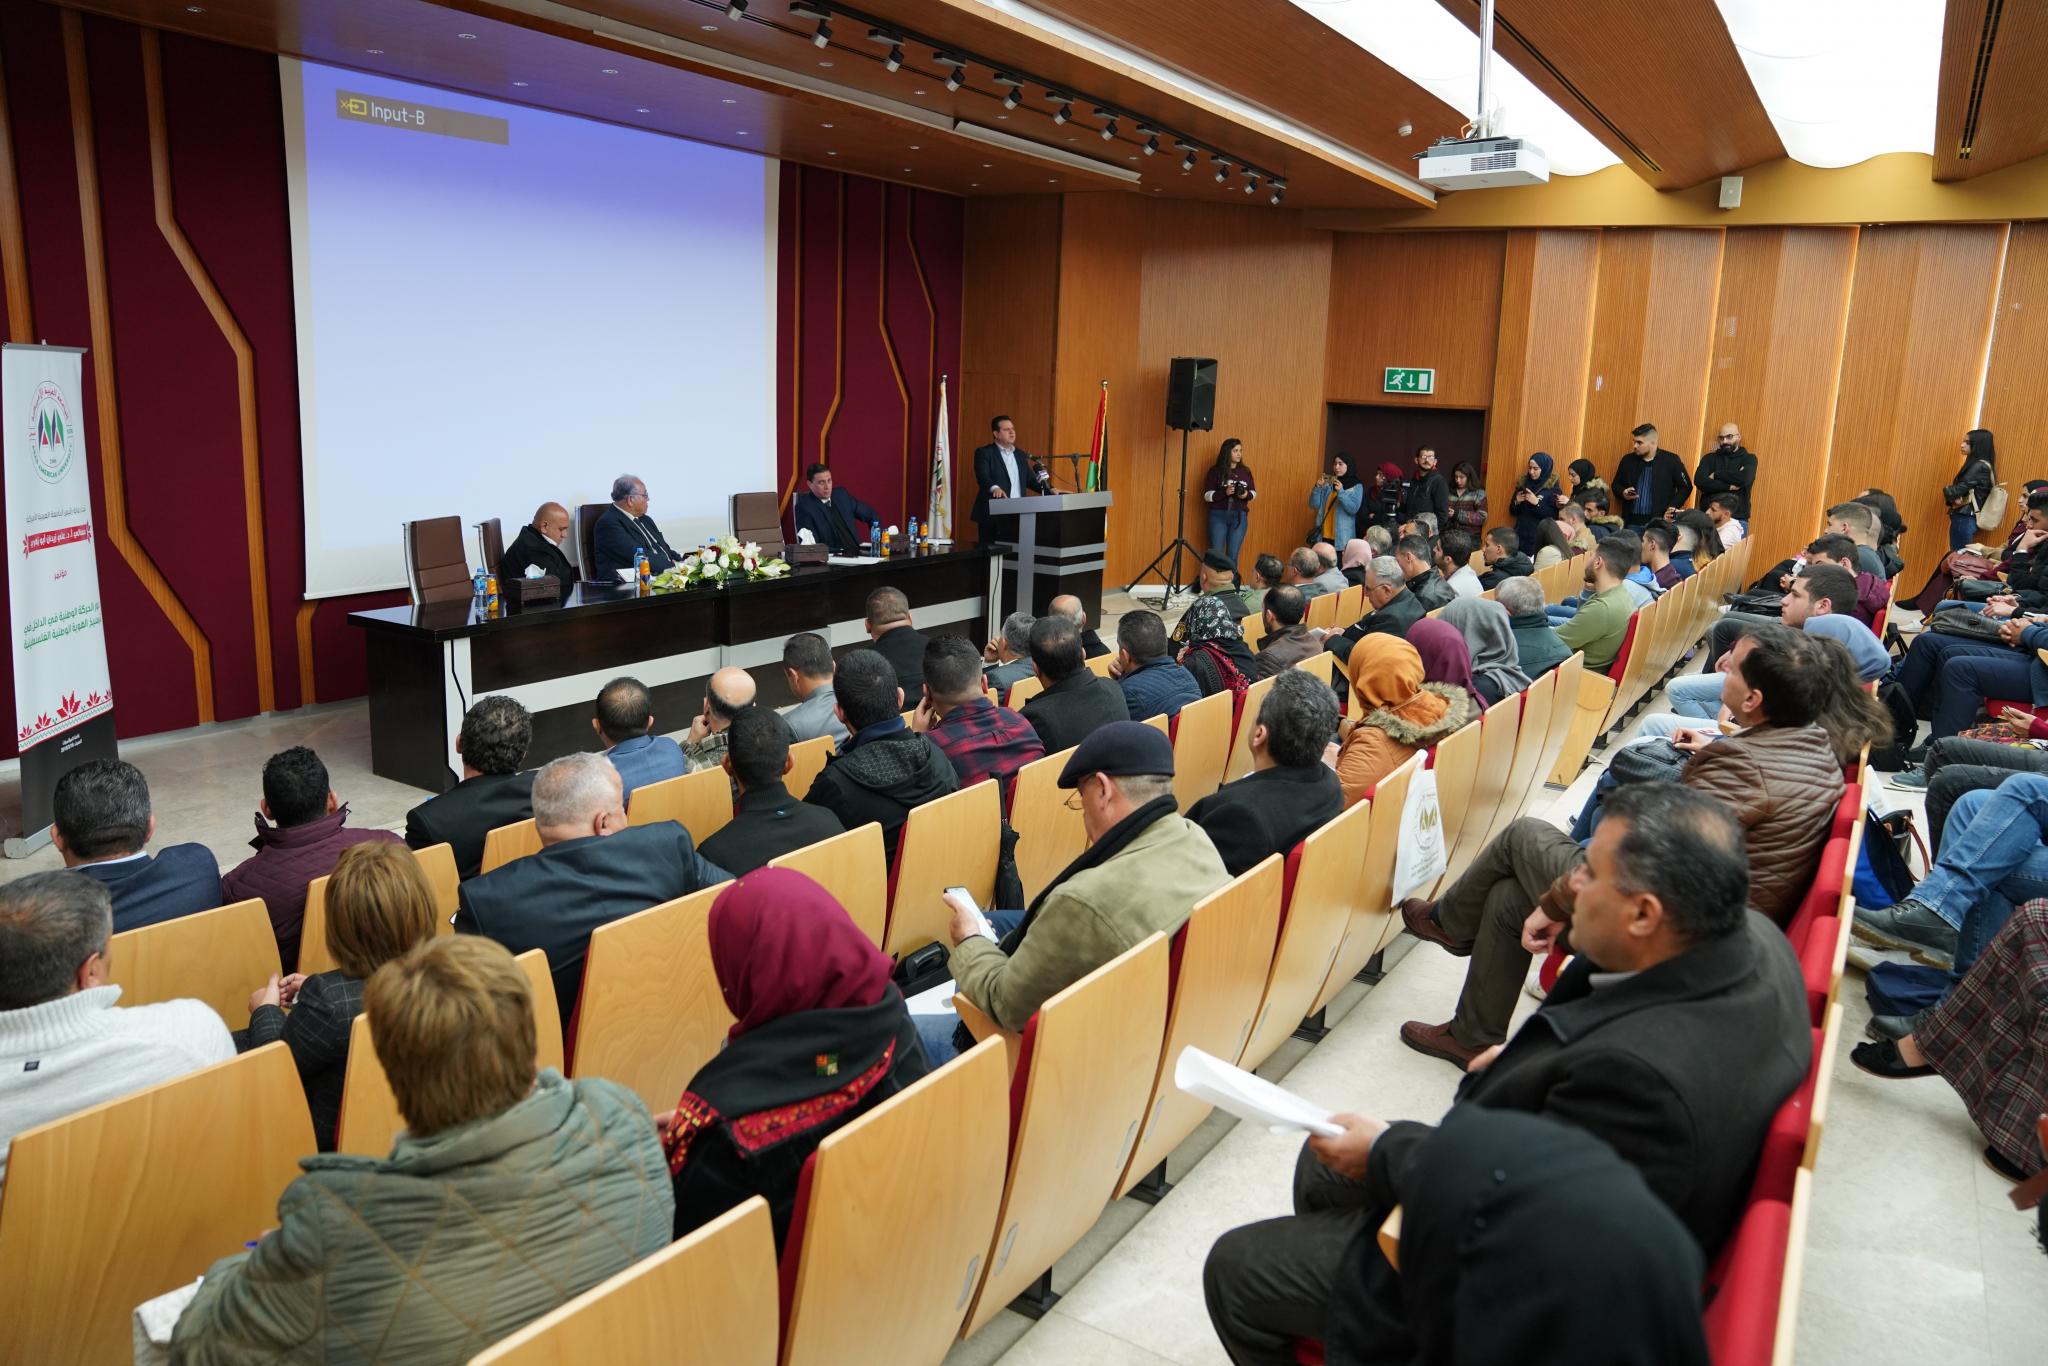 The University Organizes a Conference About "the Role of the National Movement in the 48 Palestinian Territories to Strengthen the Palestinian National Identity"